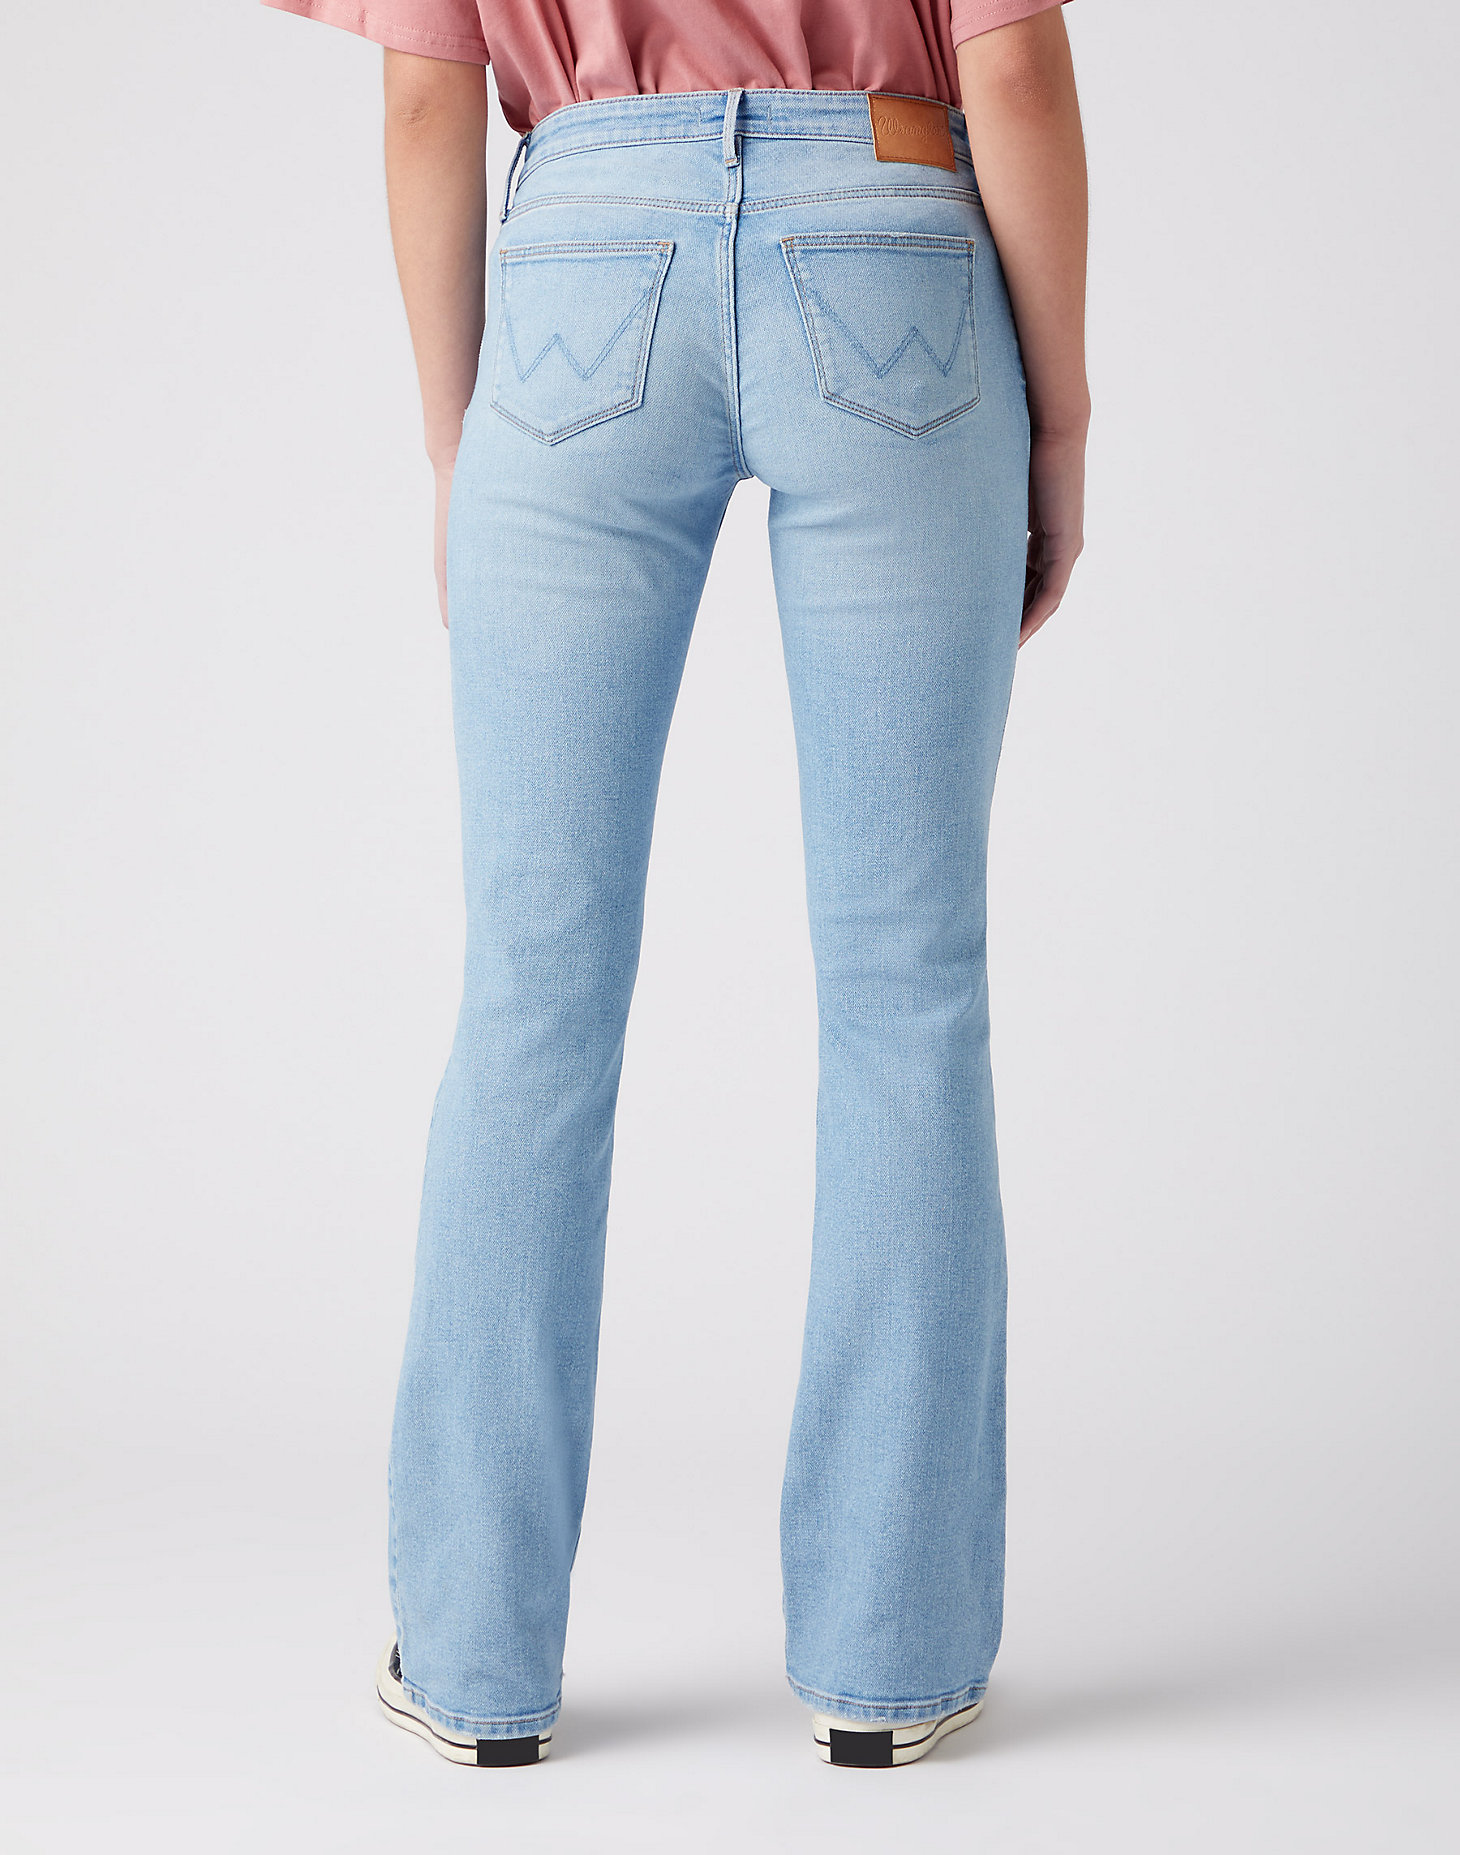 Bootcut Jeans in Tidewater alternative view 2